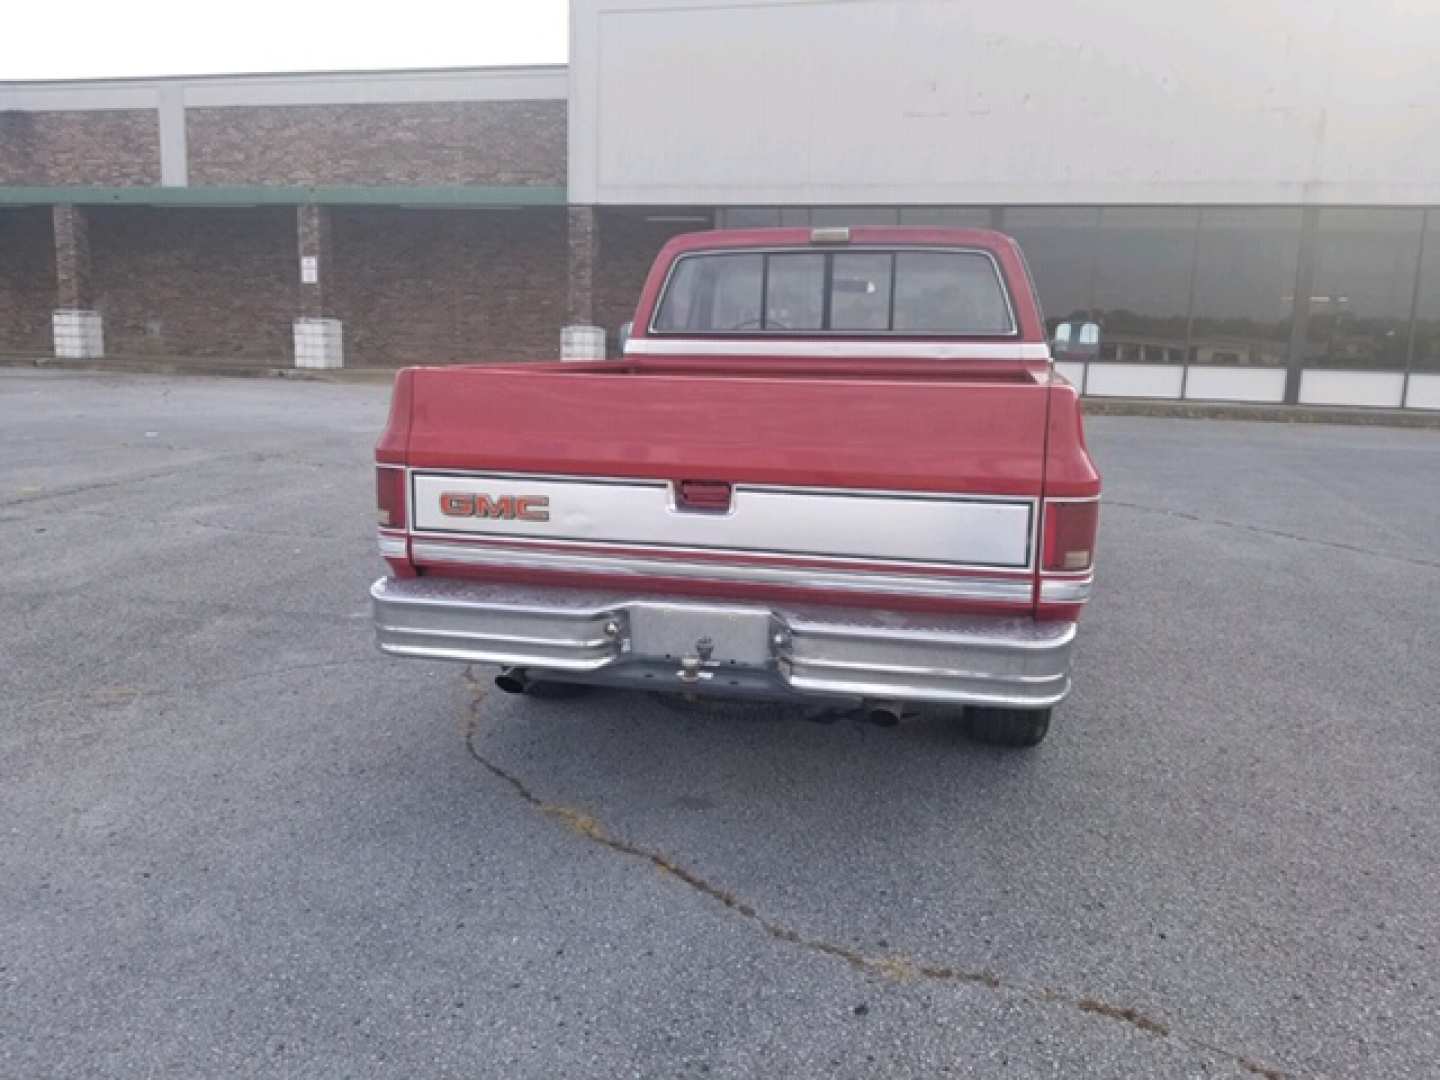 3rd Image of a 1986 GMC C1500